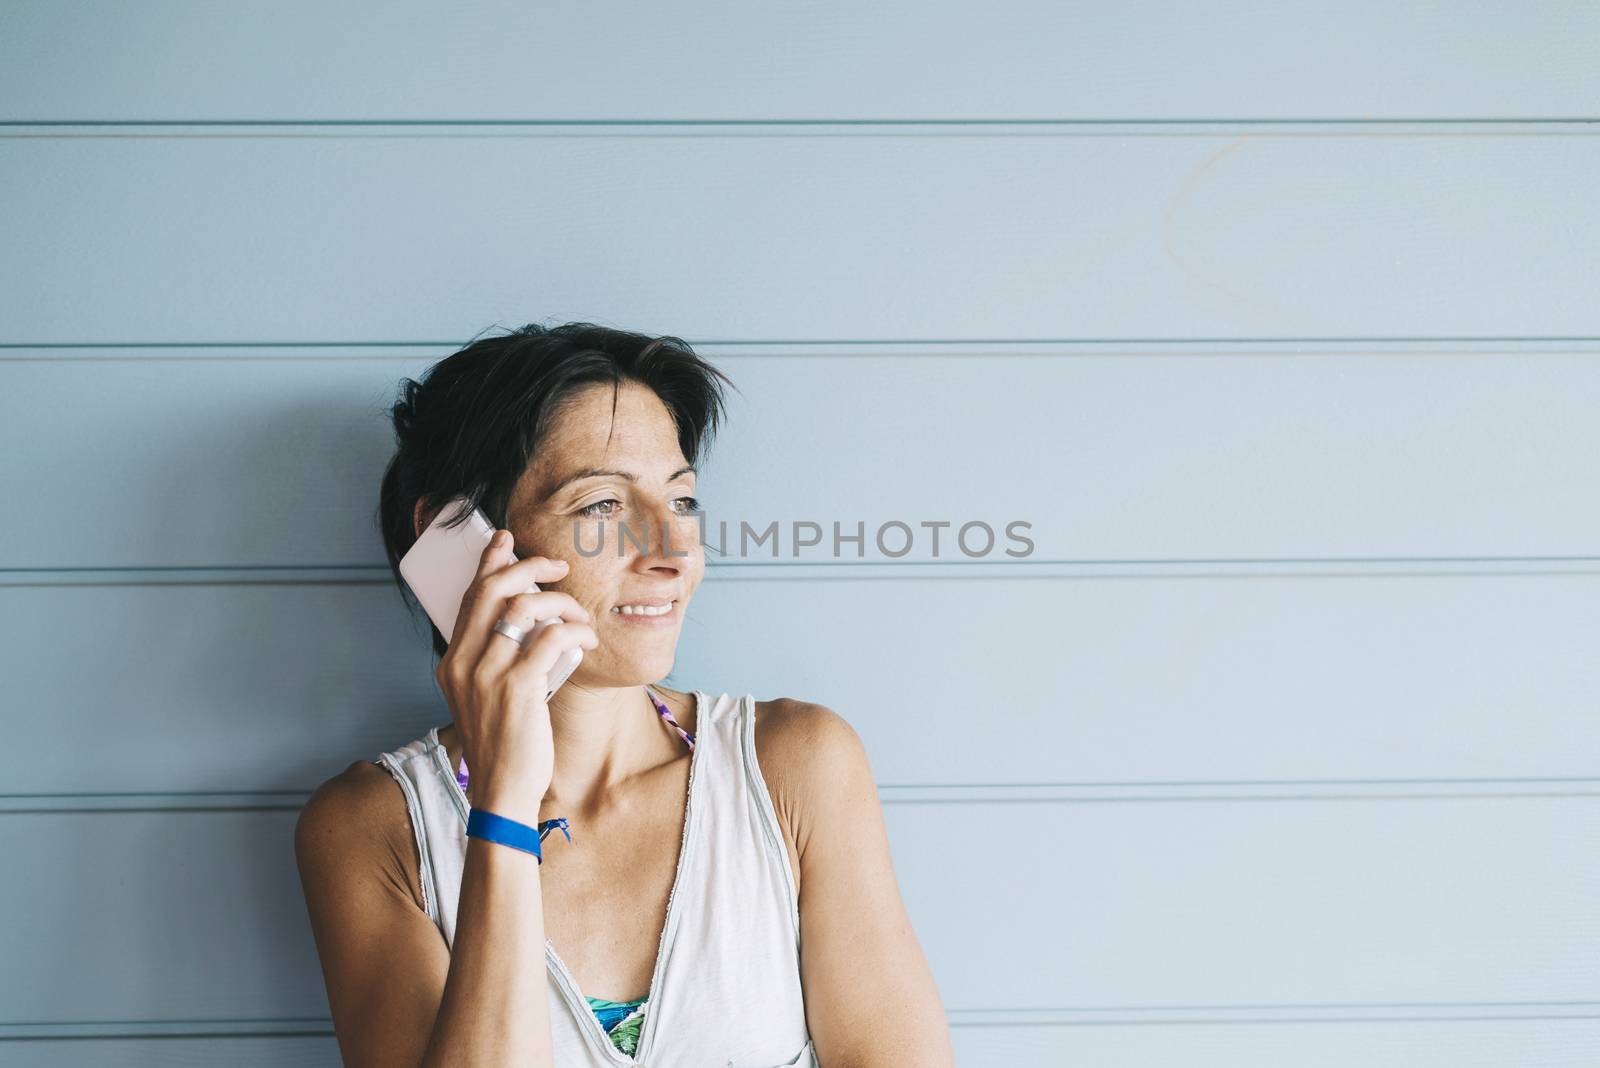 Attractive young adult female in summer dress talking on cell phone while leaning against wood paneled wall